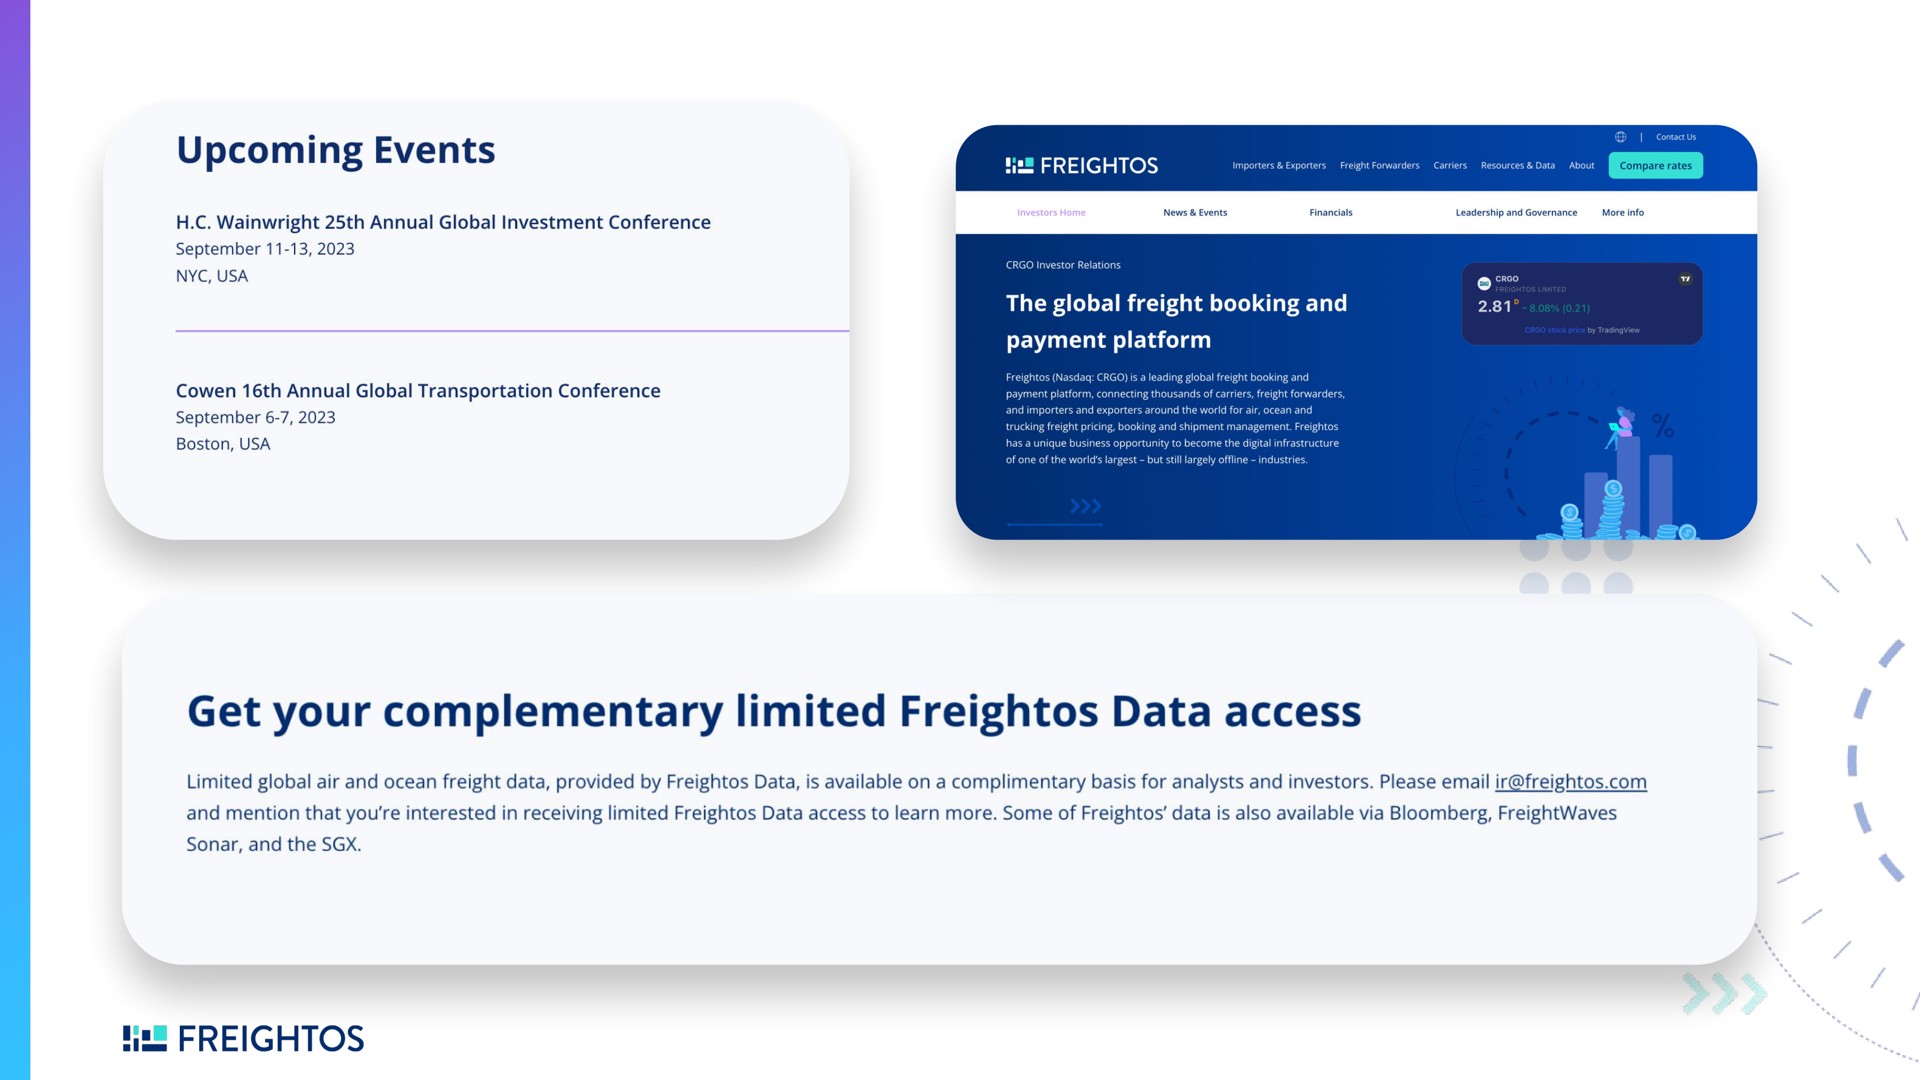 get your complementary limited data access | Freightos